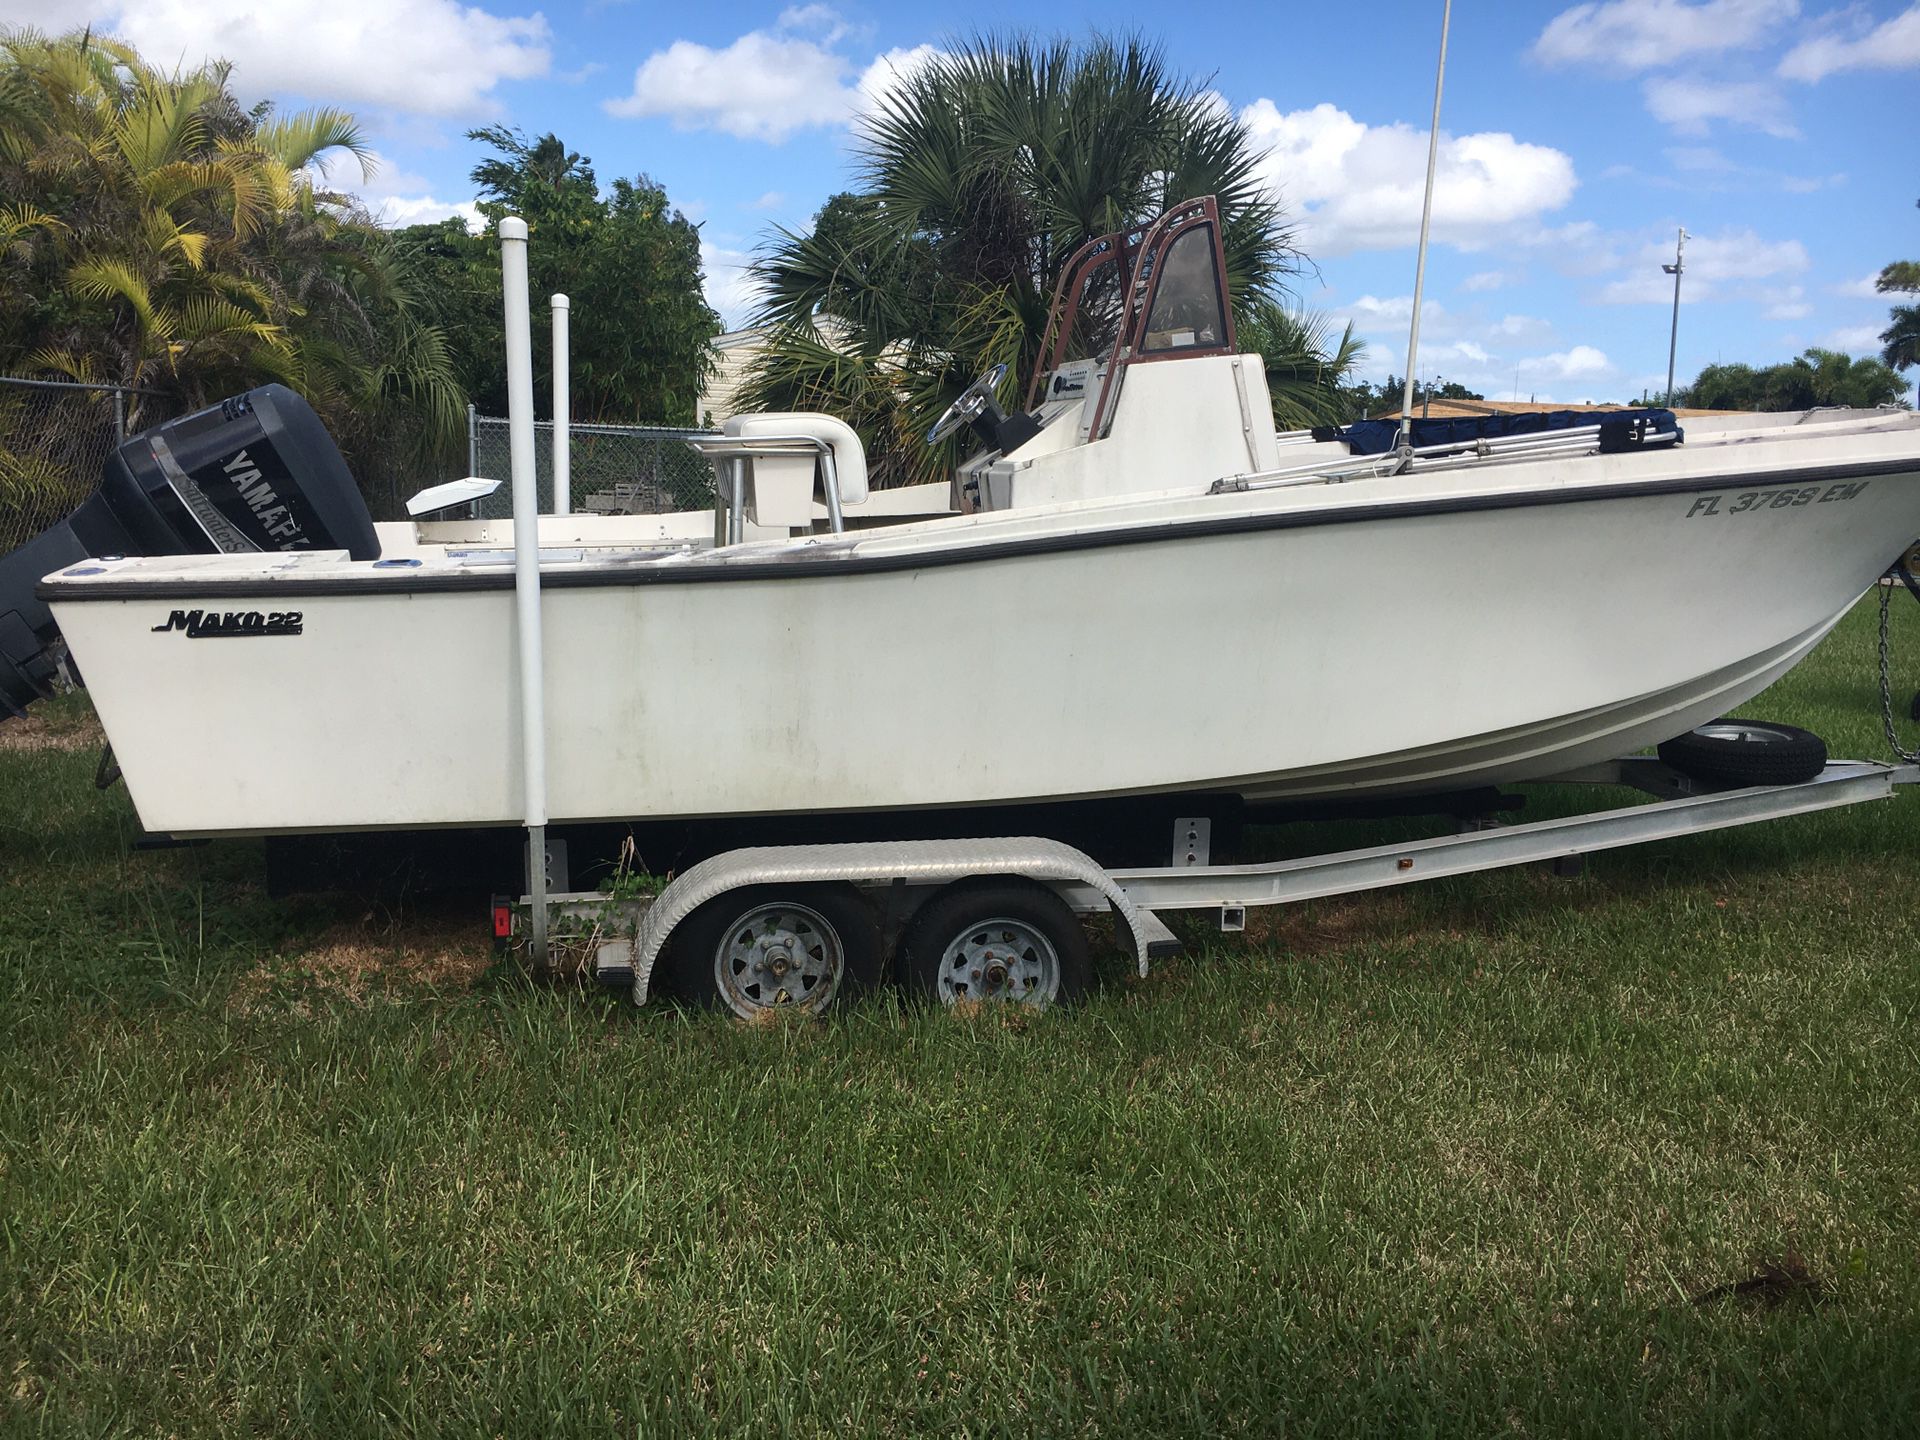 Mako 22”0 center console with 250 Yamaha. Boat has been sitting for 2 years and needs to go to new home. Has aluminum float on trailer but axles need